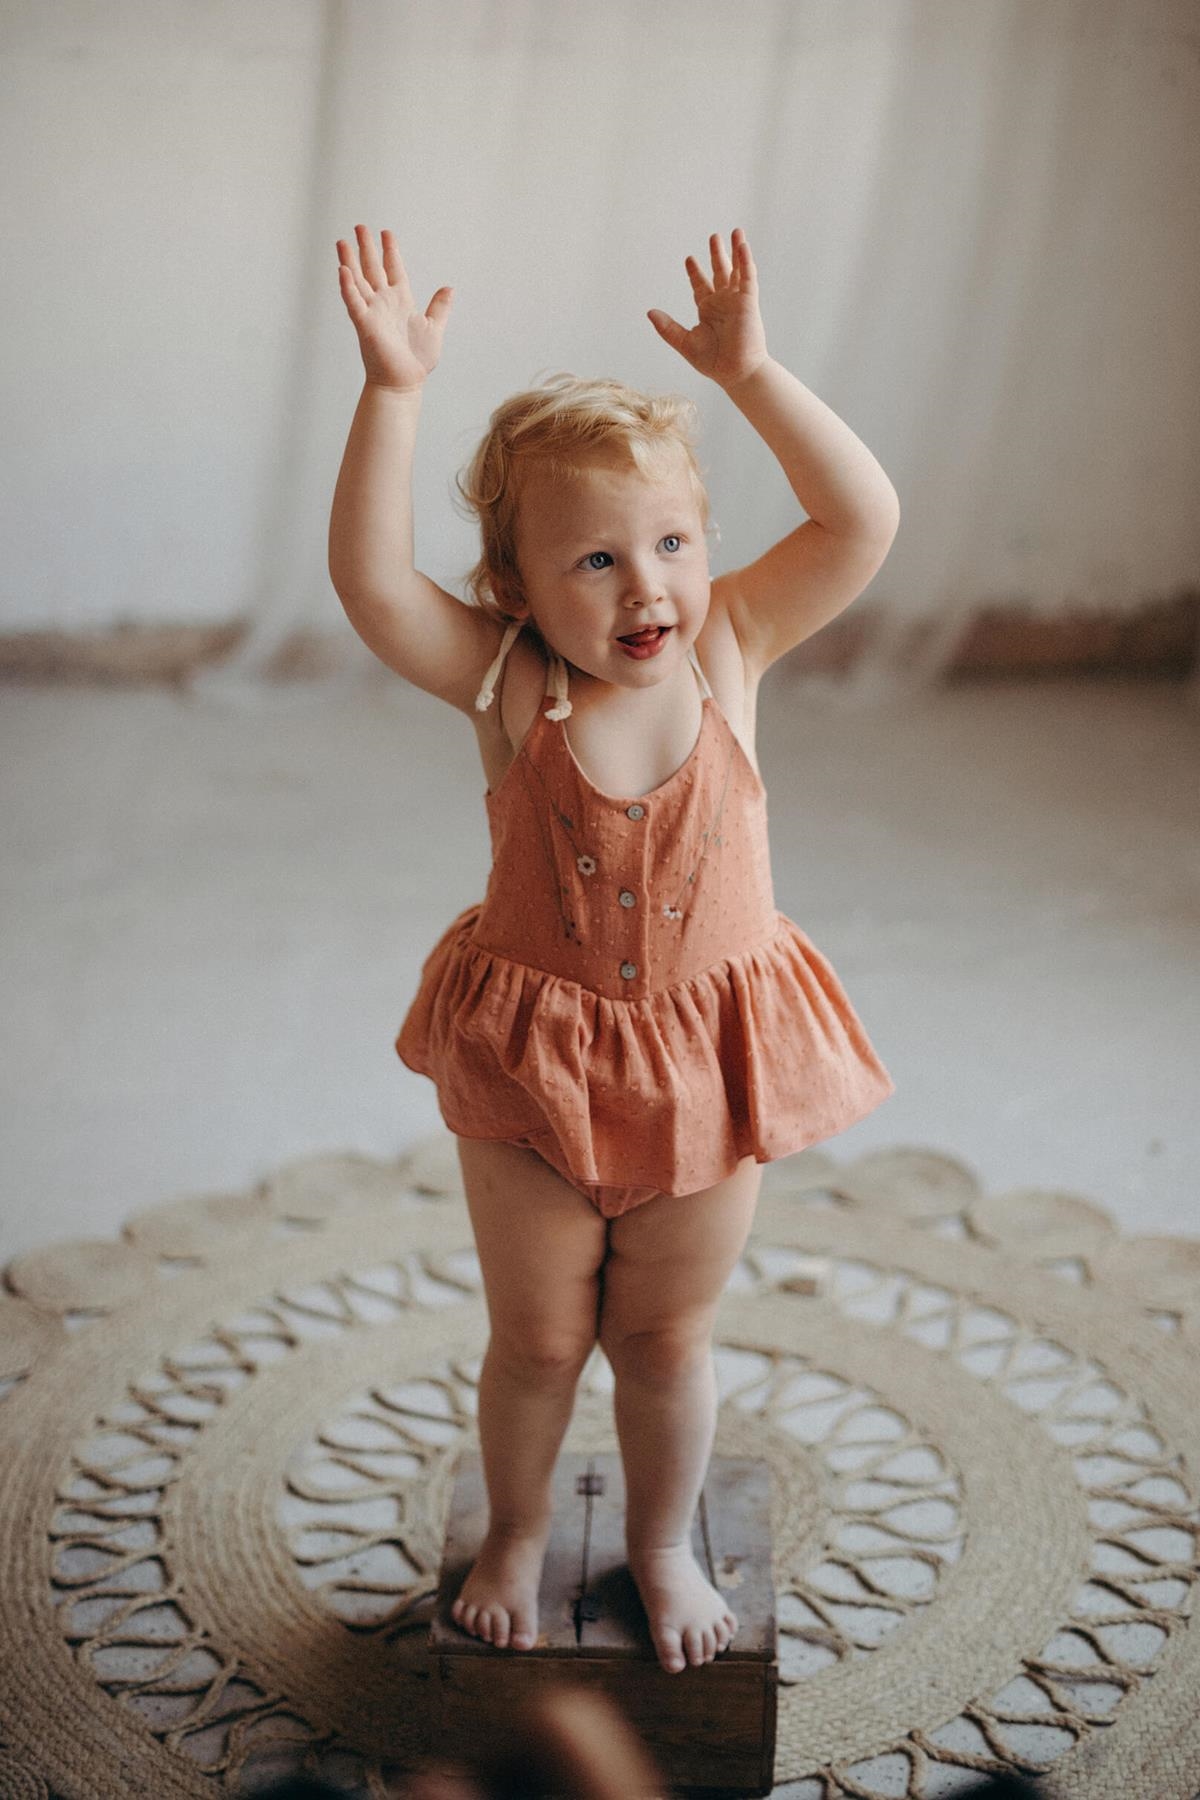 Mod.10.4 Coral organic romper suit with straps | SS23 Mod.10.4 Coral organic romper suit with straps